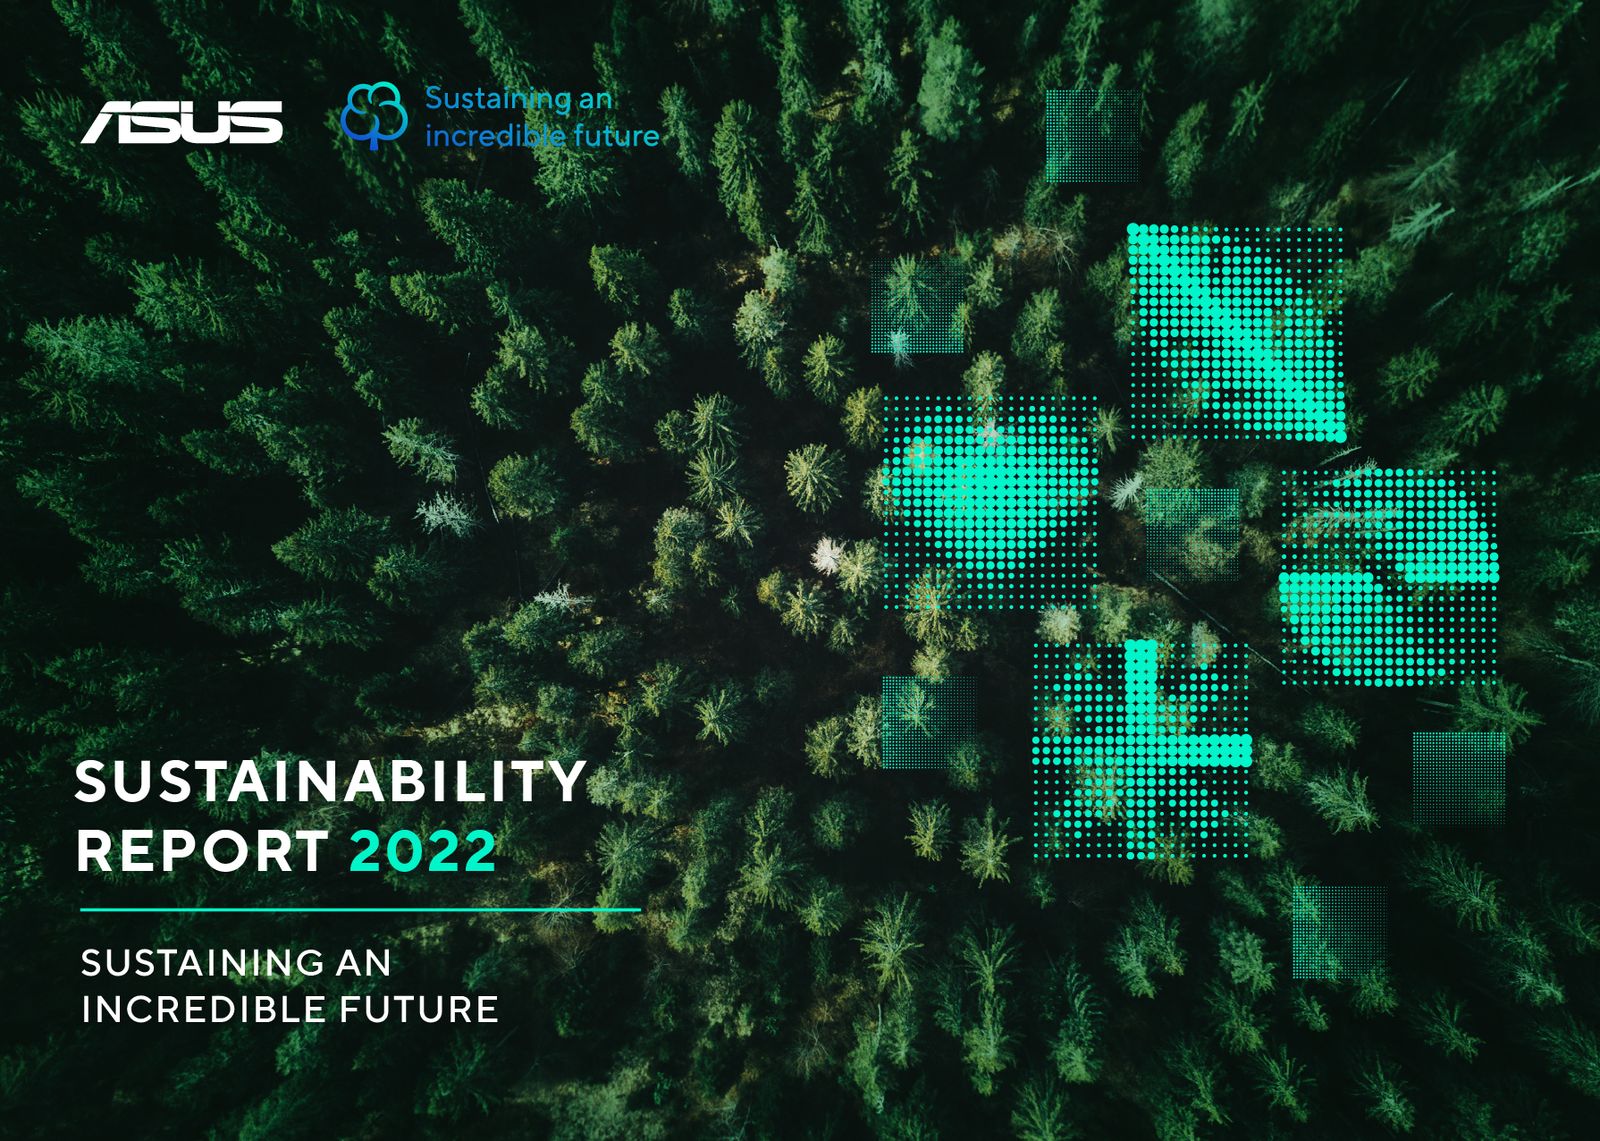 Sustainability Report 2022 1 result MMOSITE - Thông tin công nghệ, review, thủ thuật PC, gaming